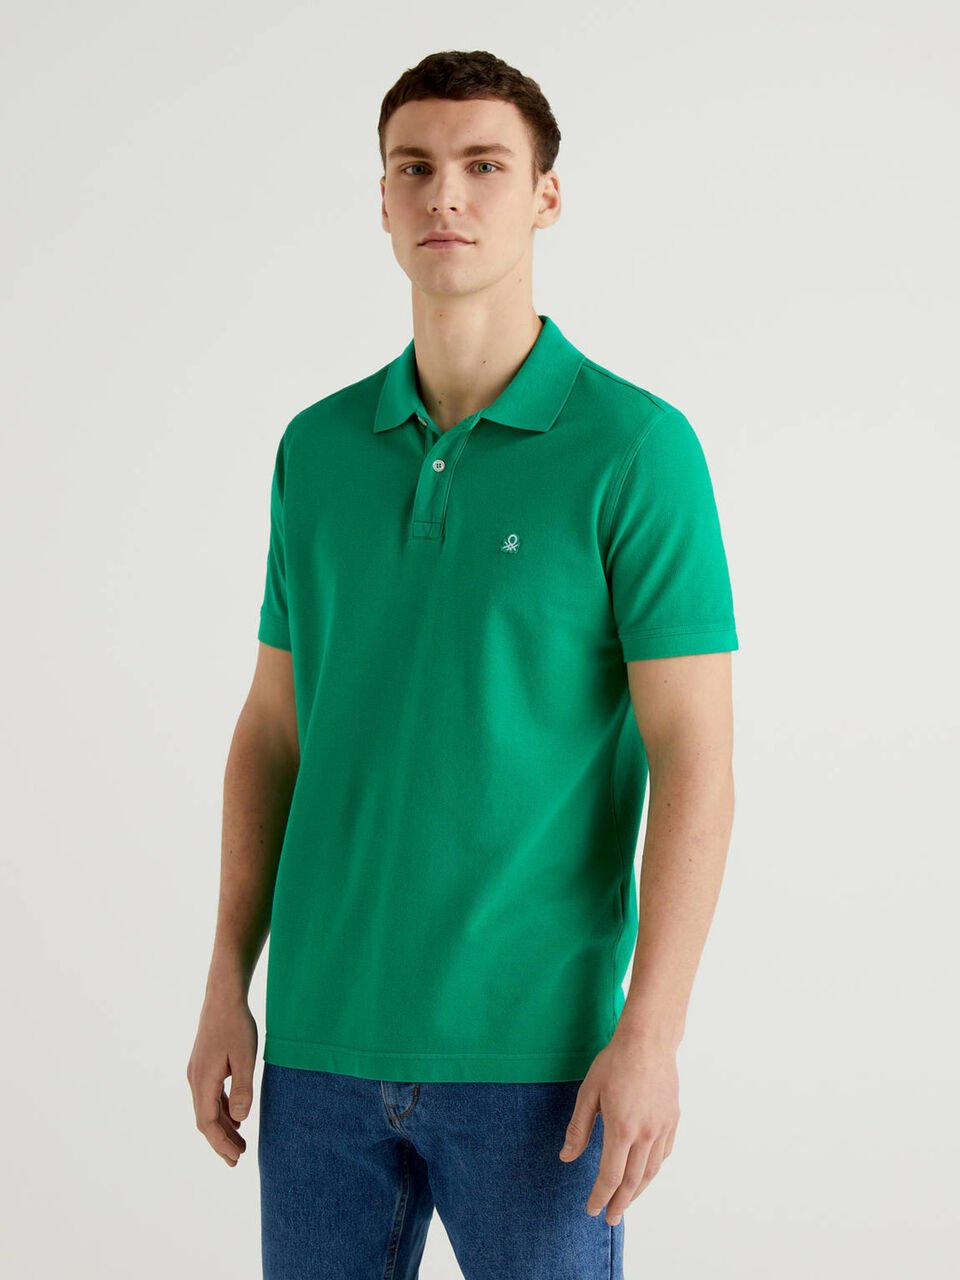 Regular fit green polo